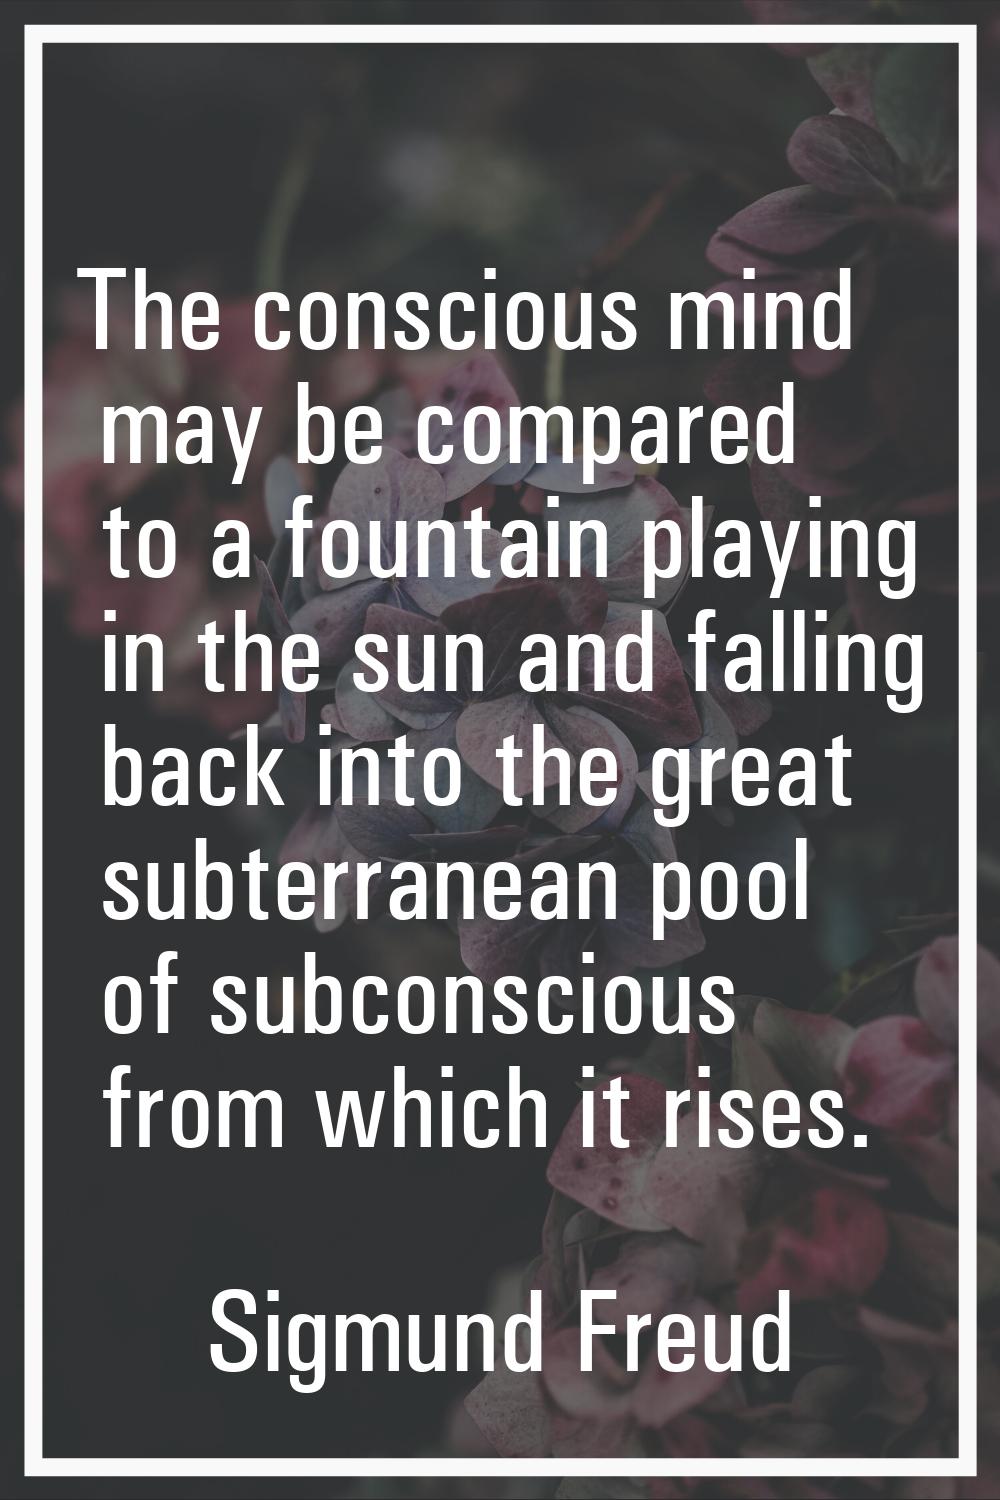 The conscious mind may be compared to a fountain playing in the sun and falling back into the great